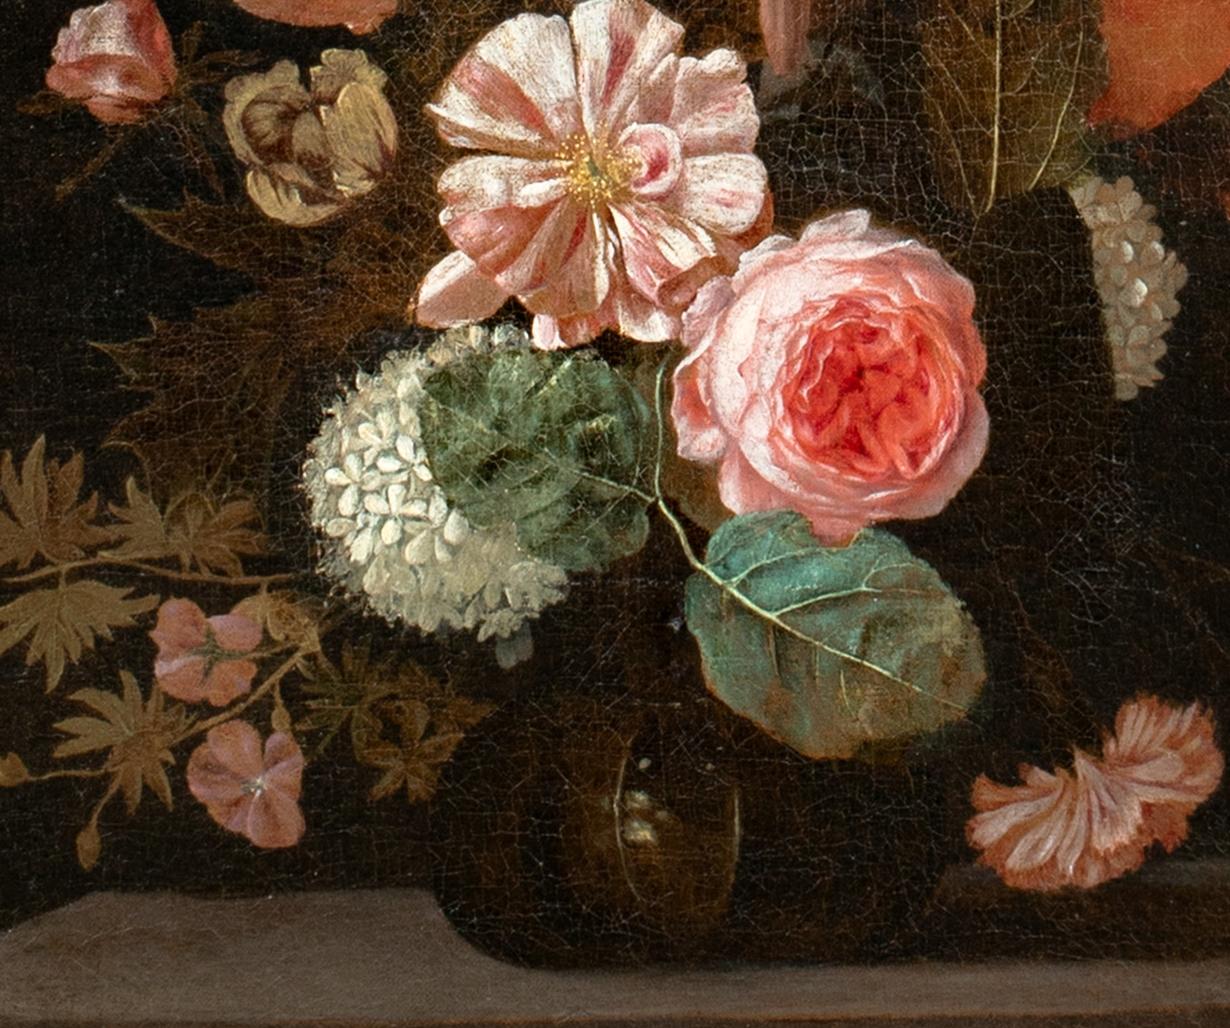 Still Life Of Roses Carnations Hollyhocks and Other Flowers, 17th Century  - Brown Portrait Painting by Cornelis Kick